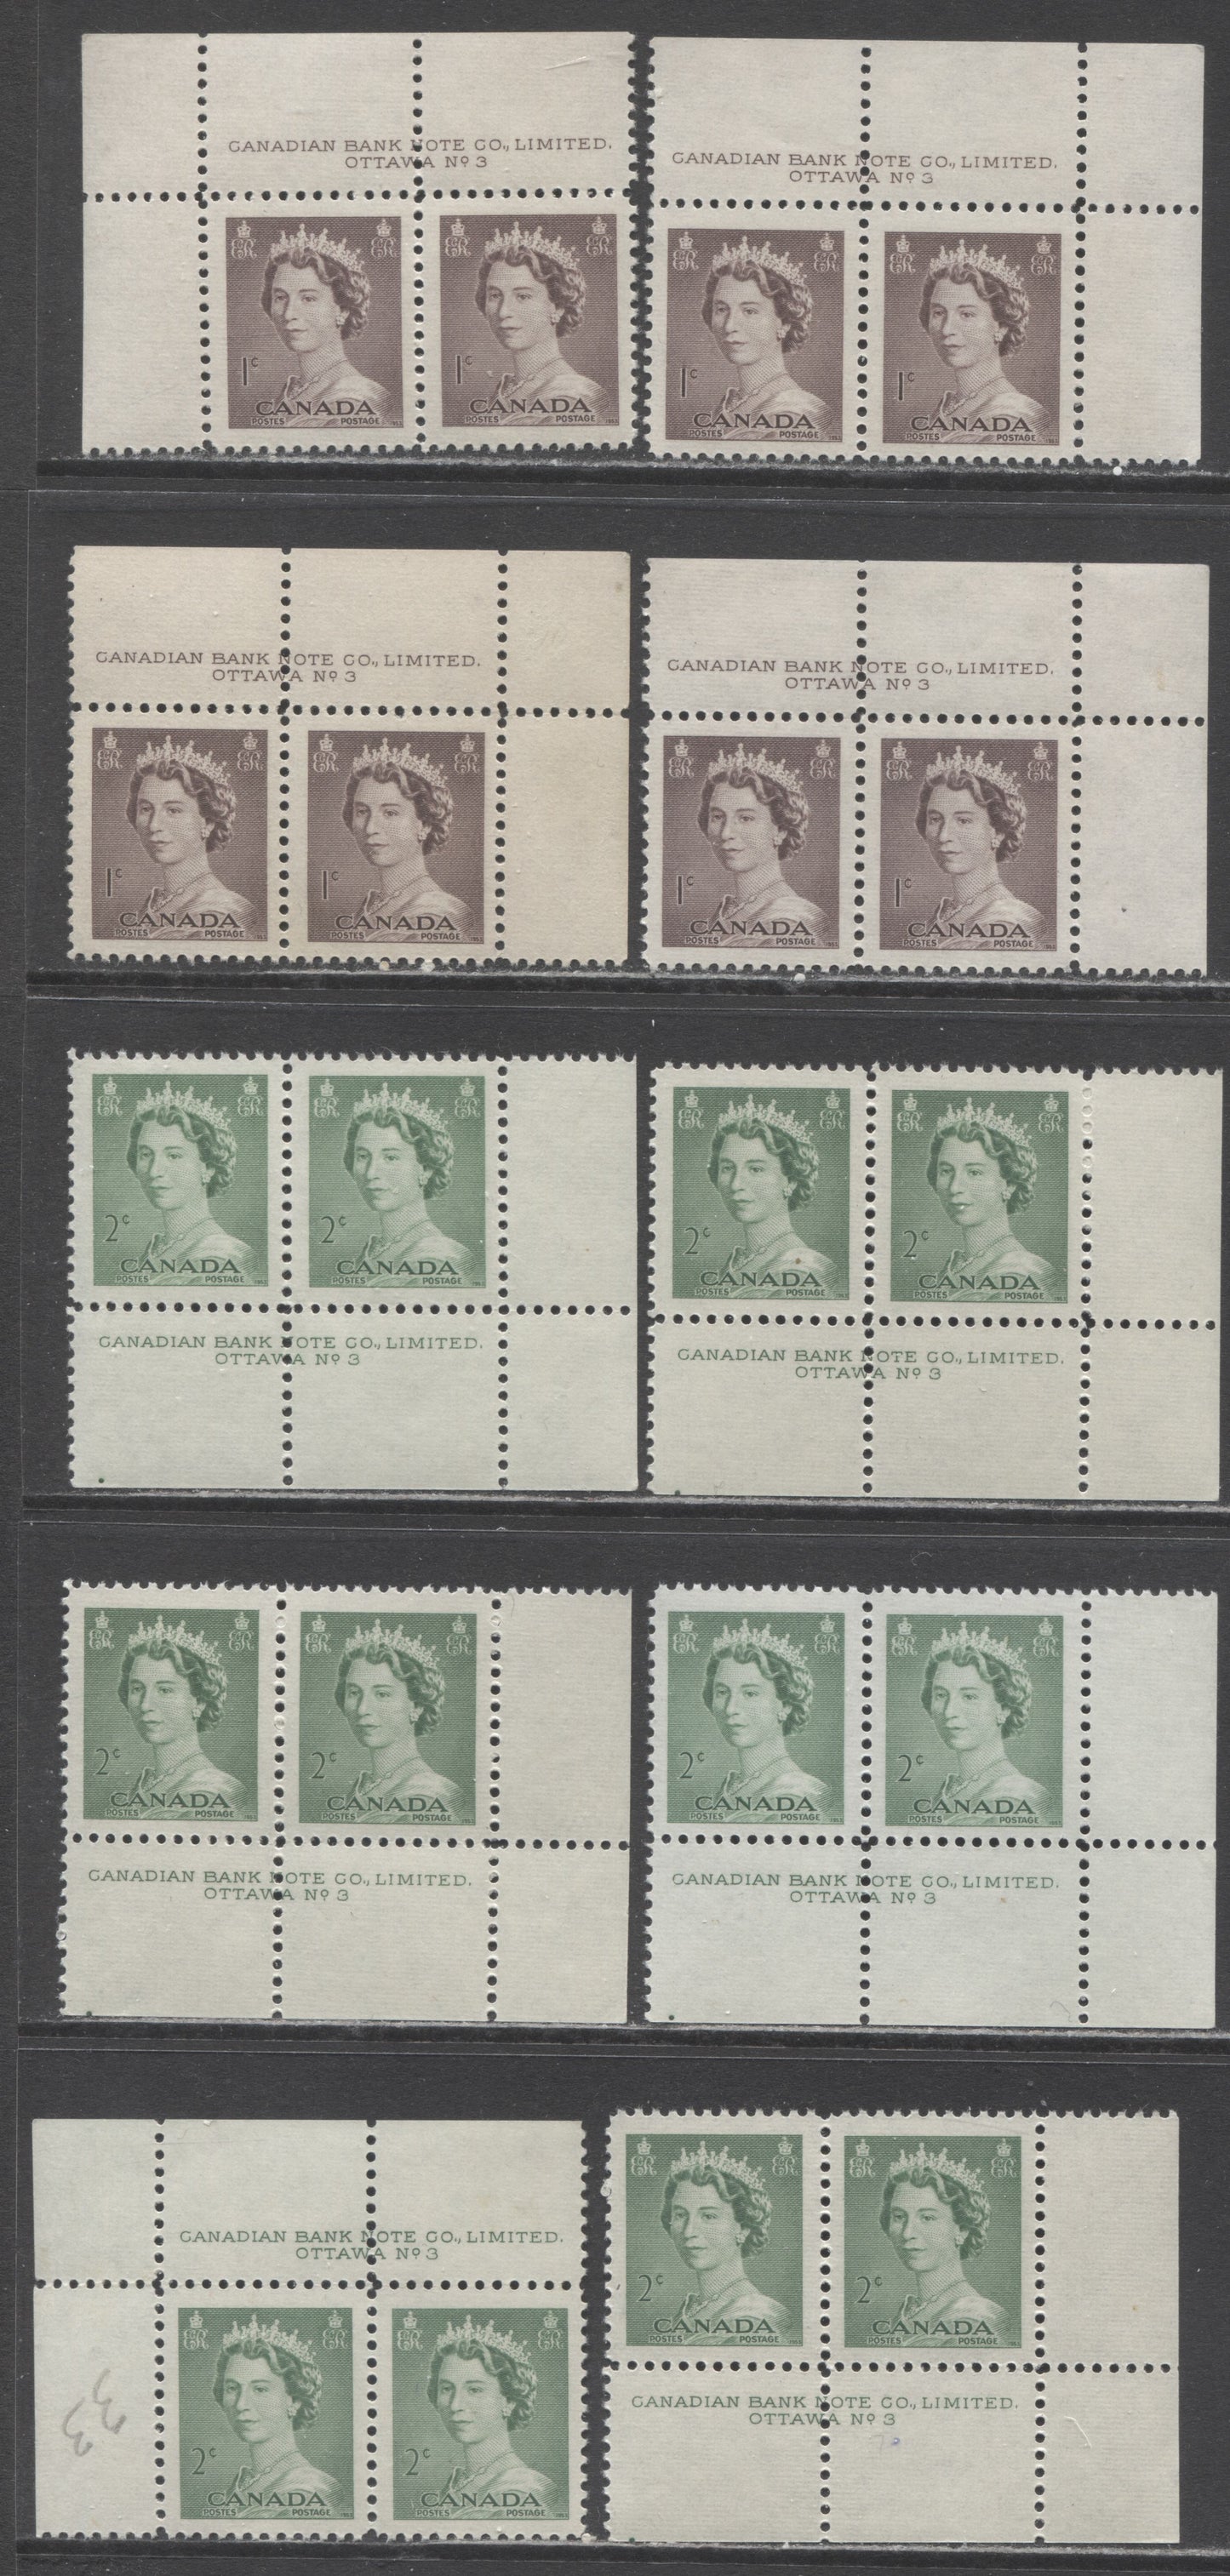 Lot 235 Canada #325-326 1c-2c Violet Brown & Pale Green Queen Elizabeth II, 1953-1954 Karsh Issue, 10 VFNH Plate 3 Inscription Pairs, Various Shades, Different Perfs